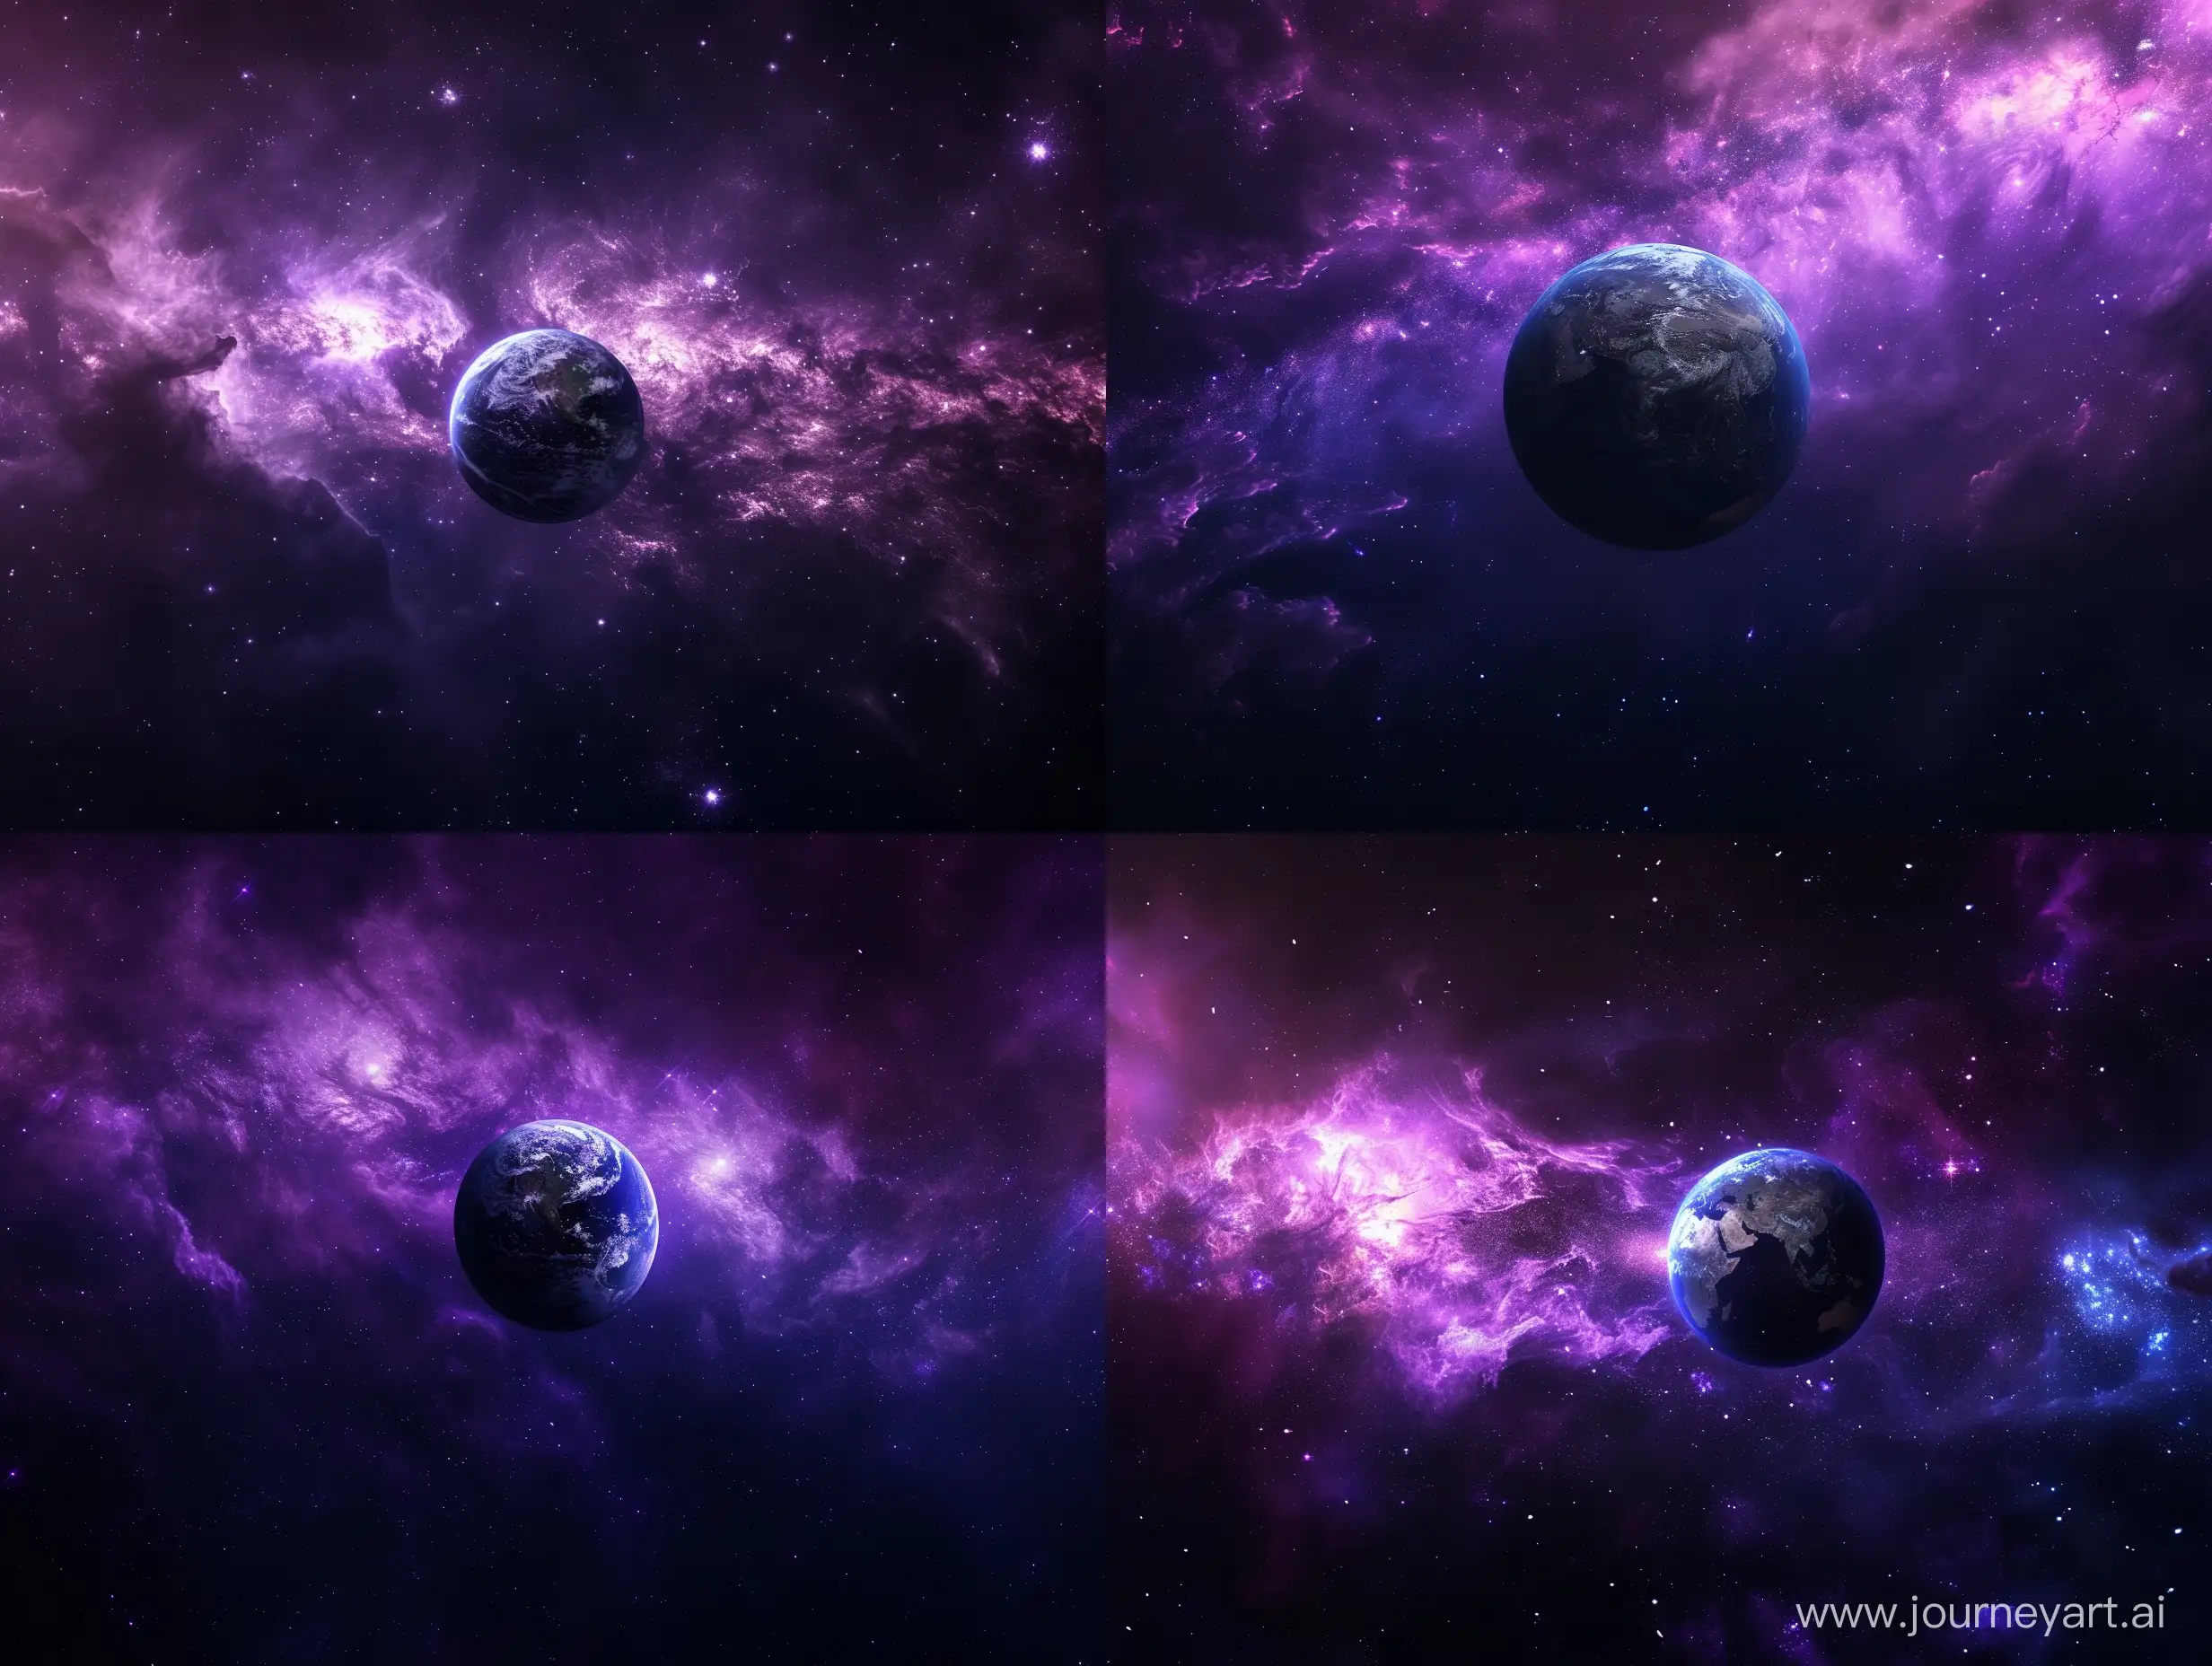 wide screen image. dark purple and dark blue and black color theme. background: galaxy. earth object with diameter of 30% of image height. Earth object in the image center. 